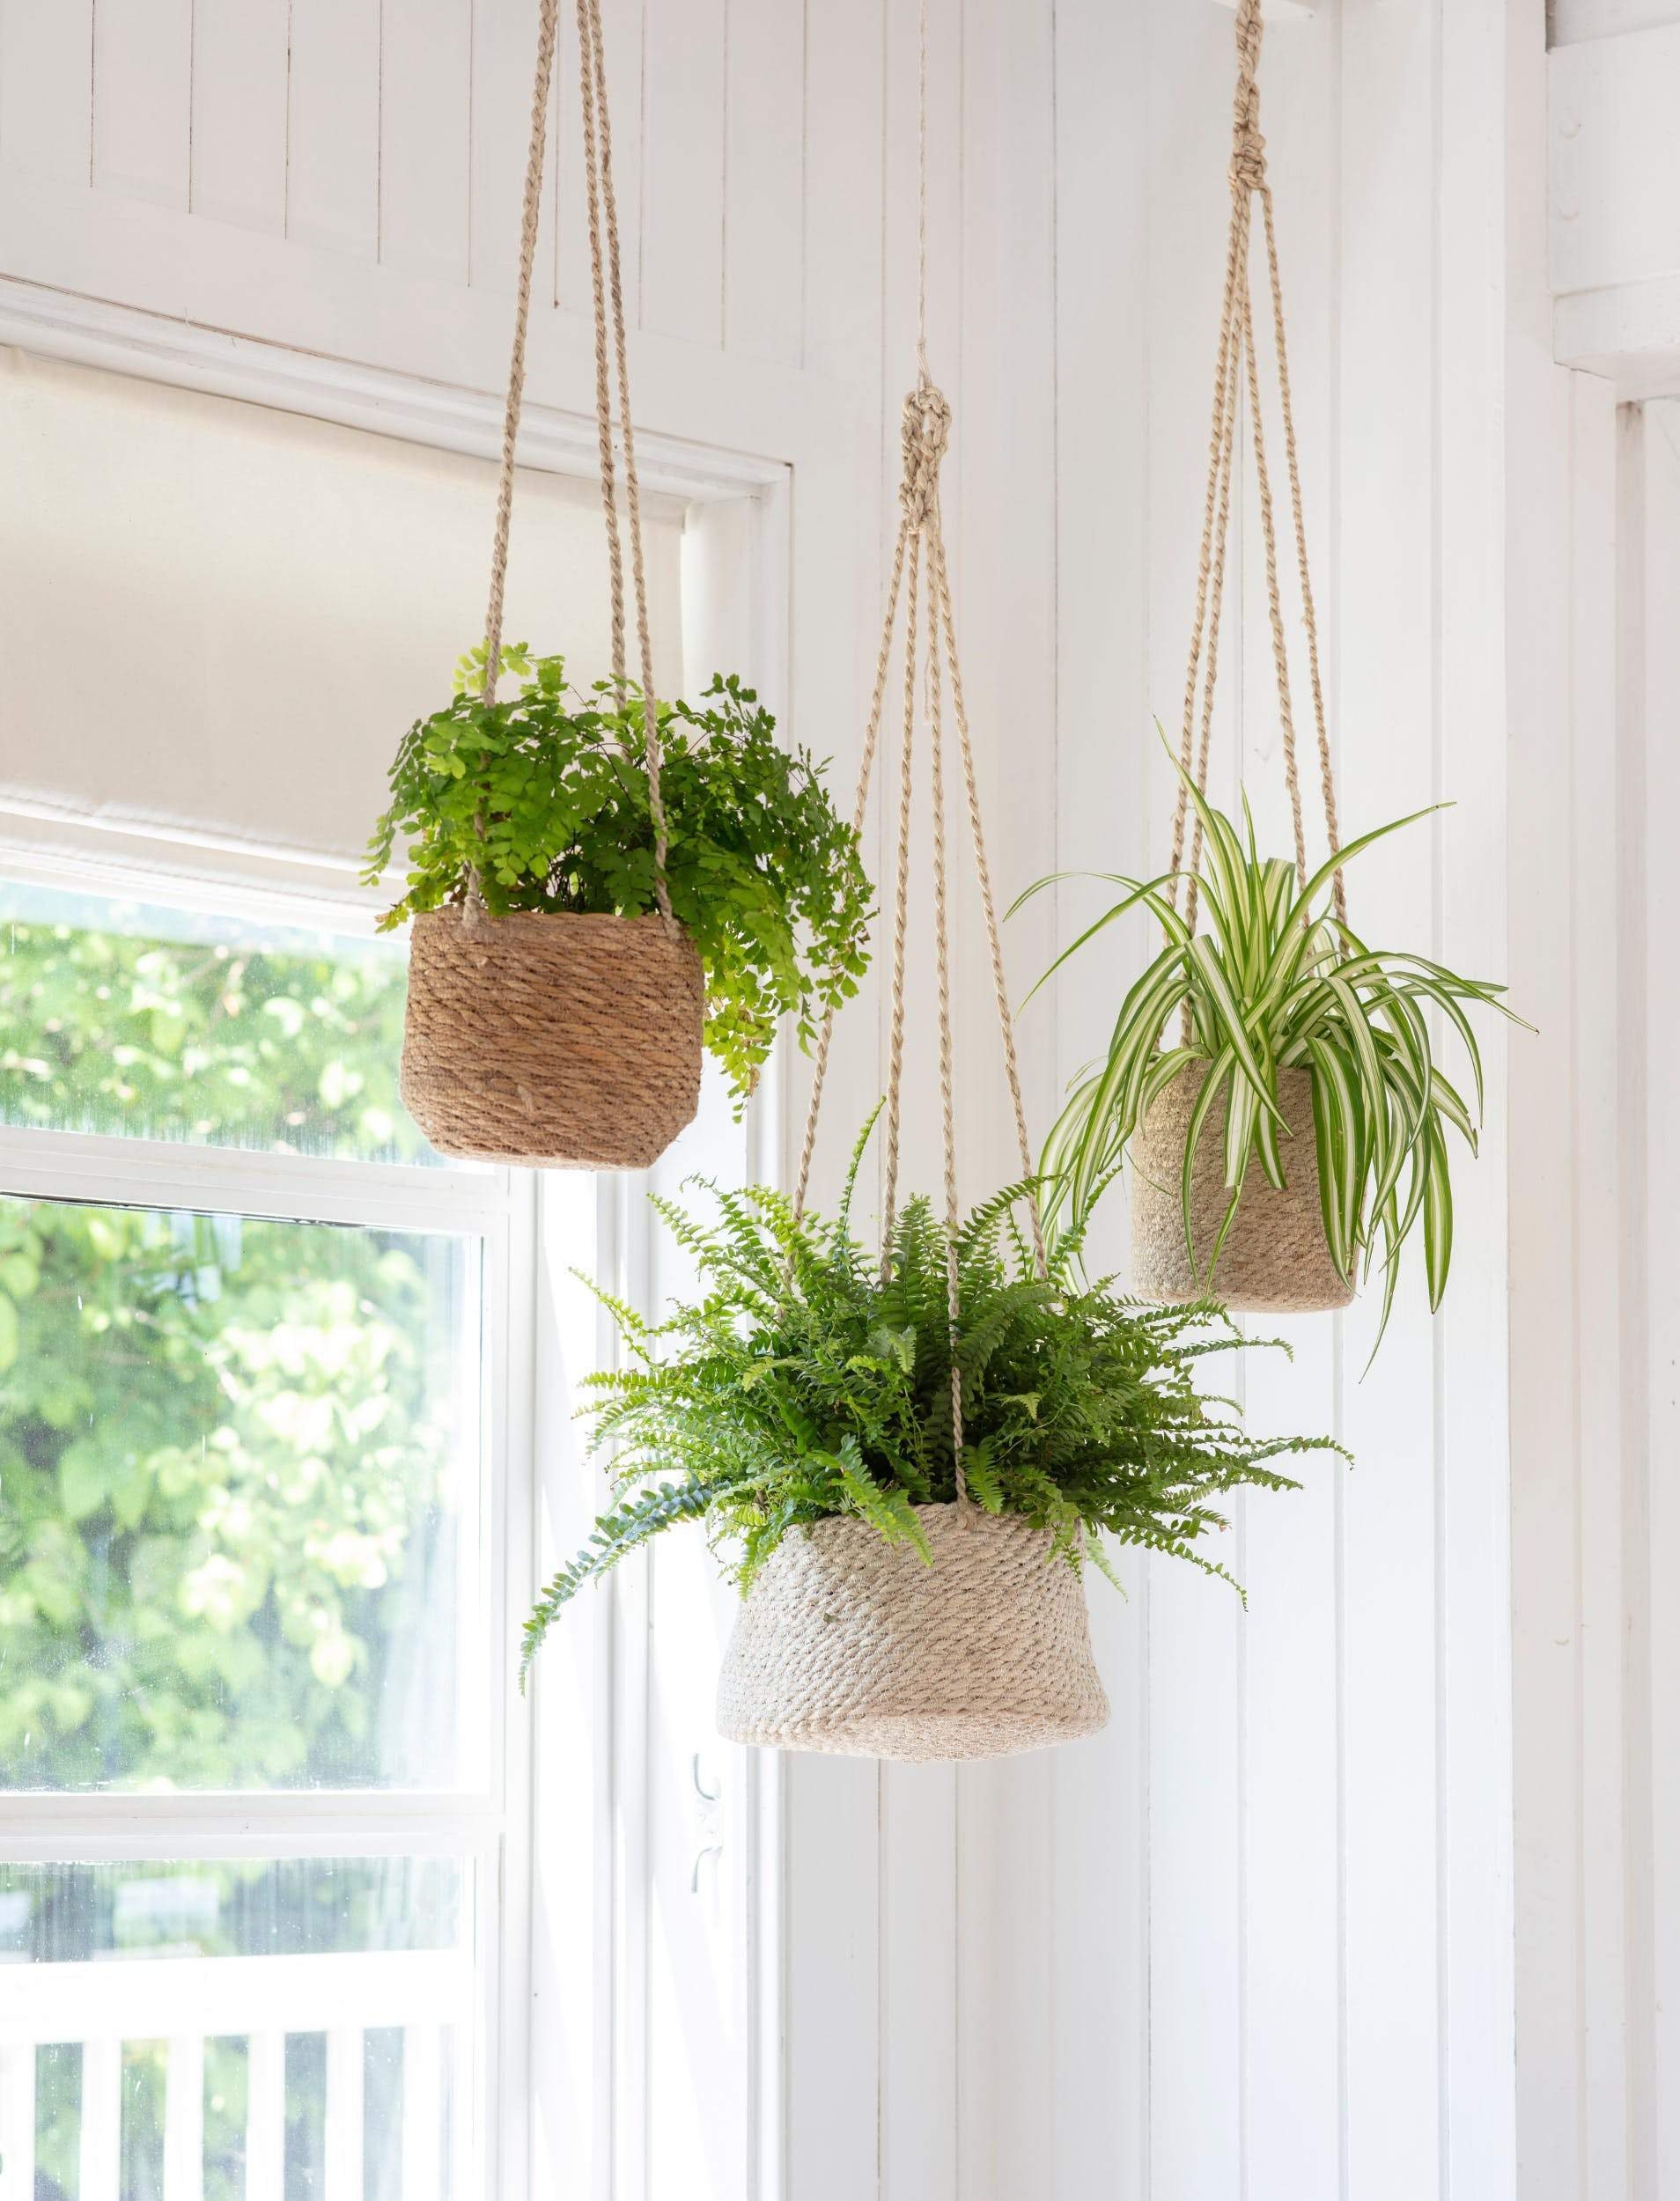 Image of Rope hanging basket with natural feel